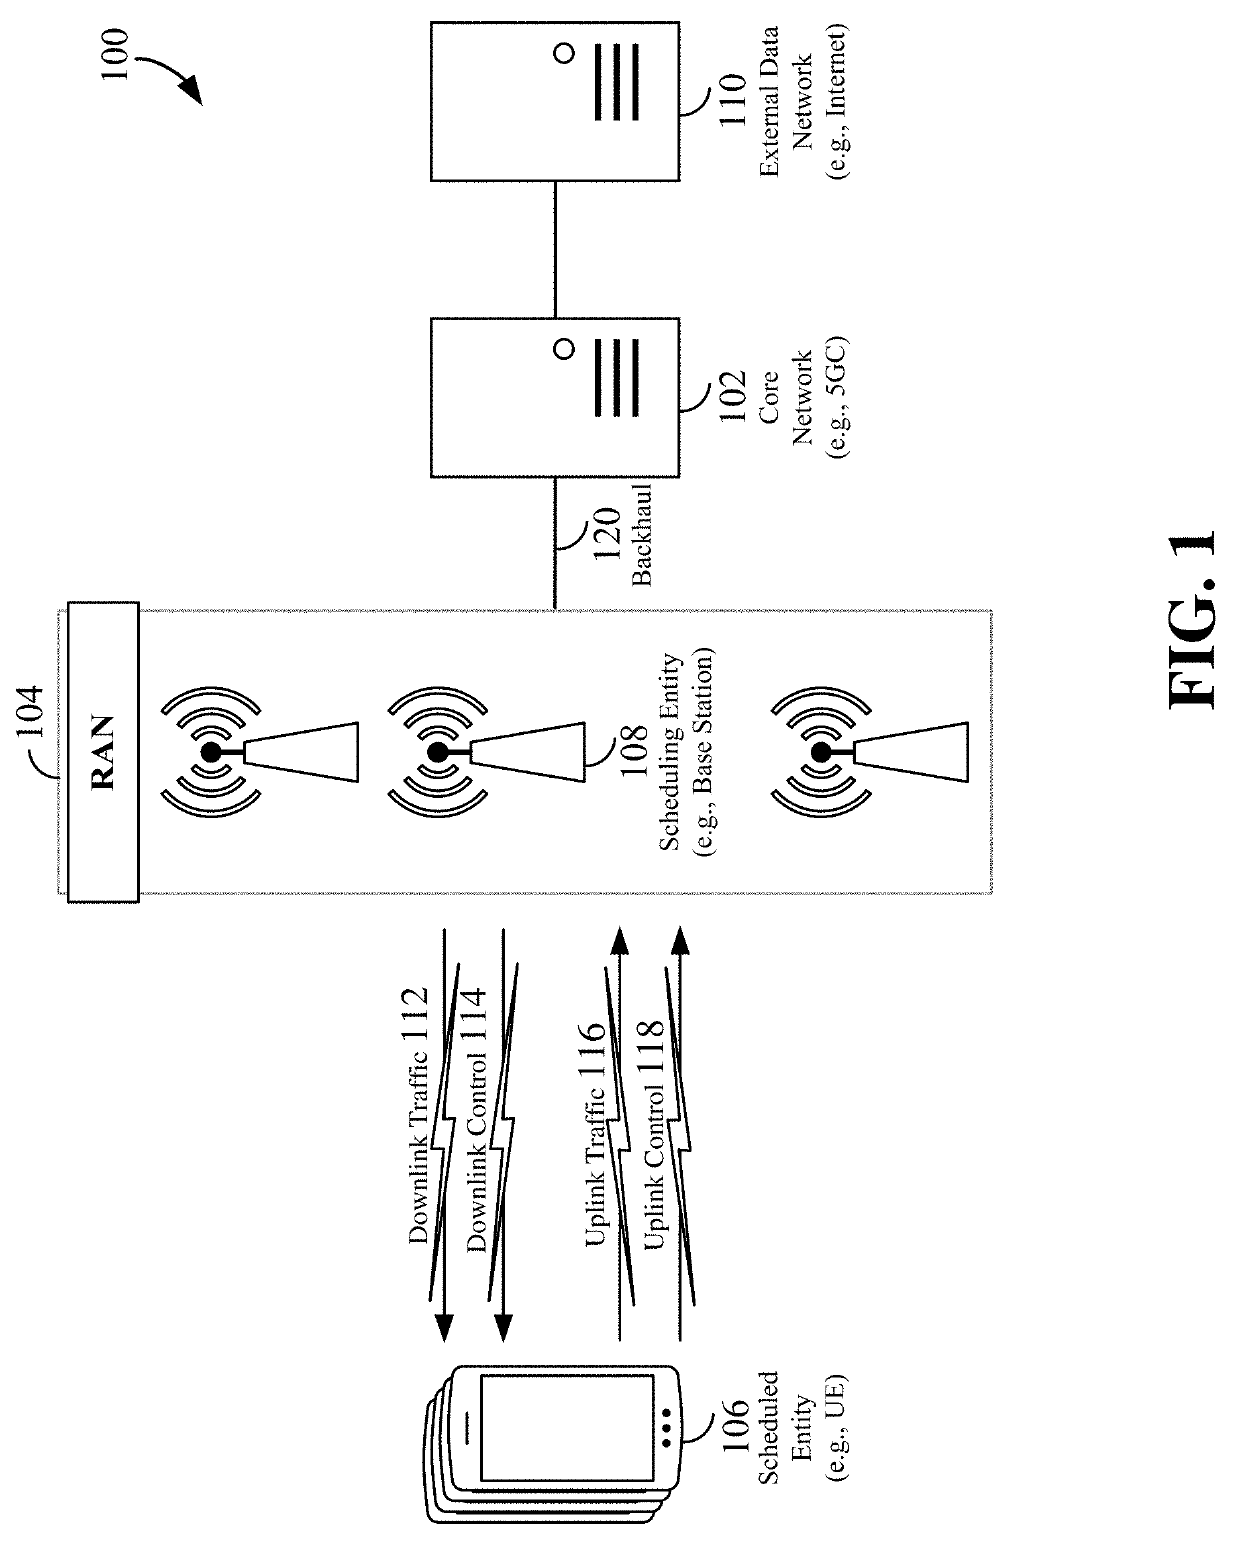 Sounding reference signal antenna switching in scheduled entities having at least four antennas